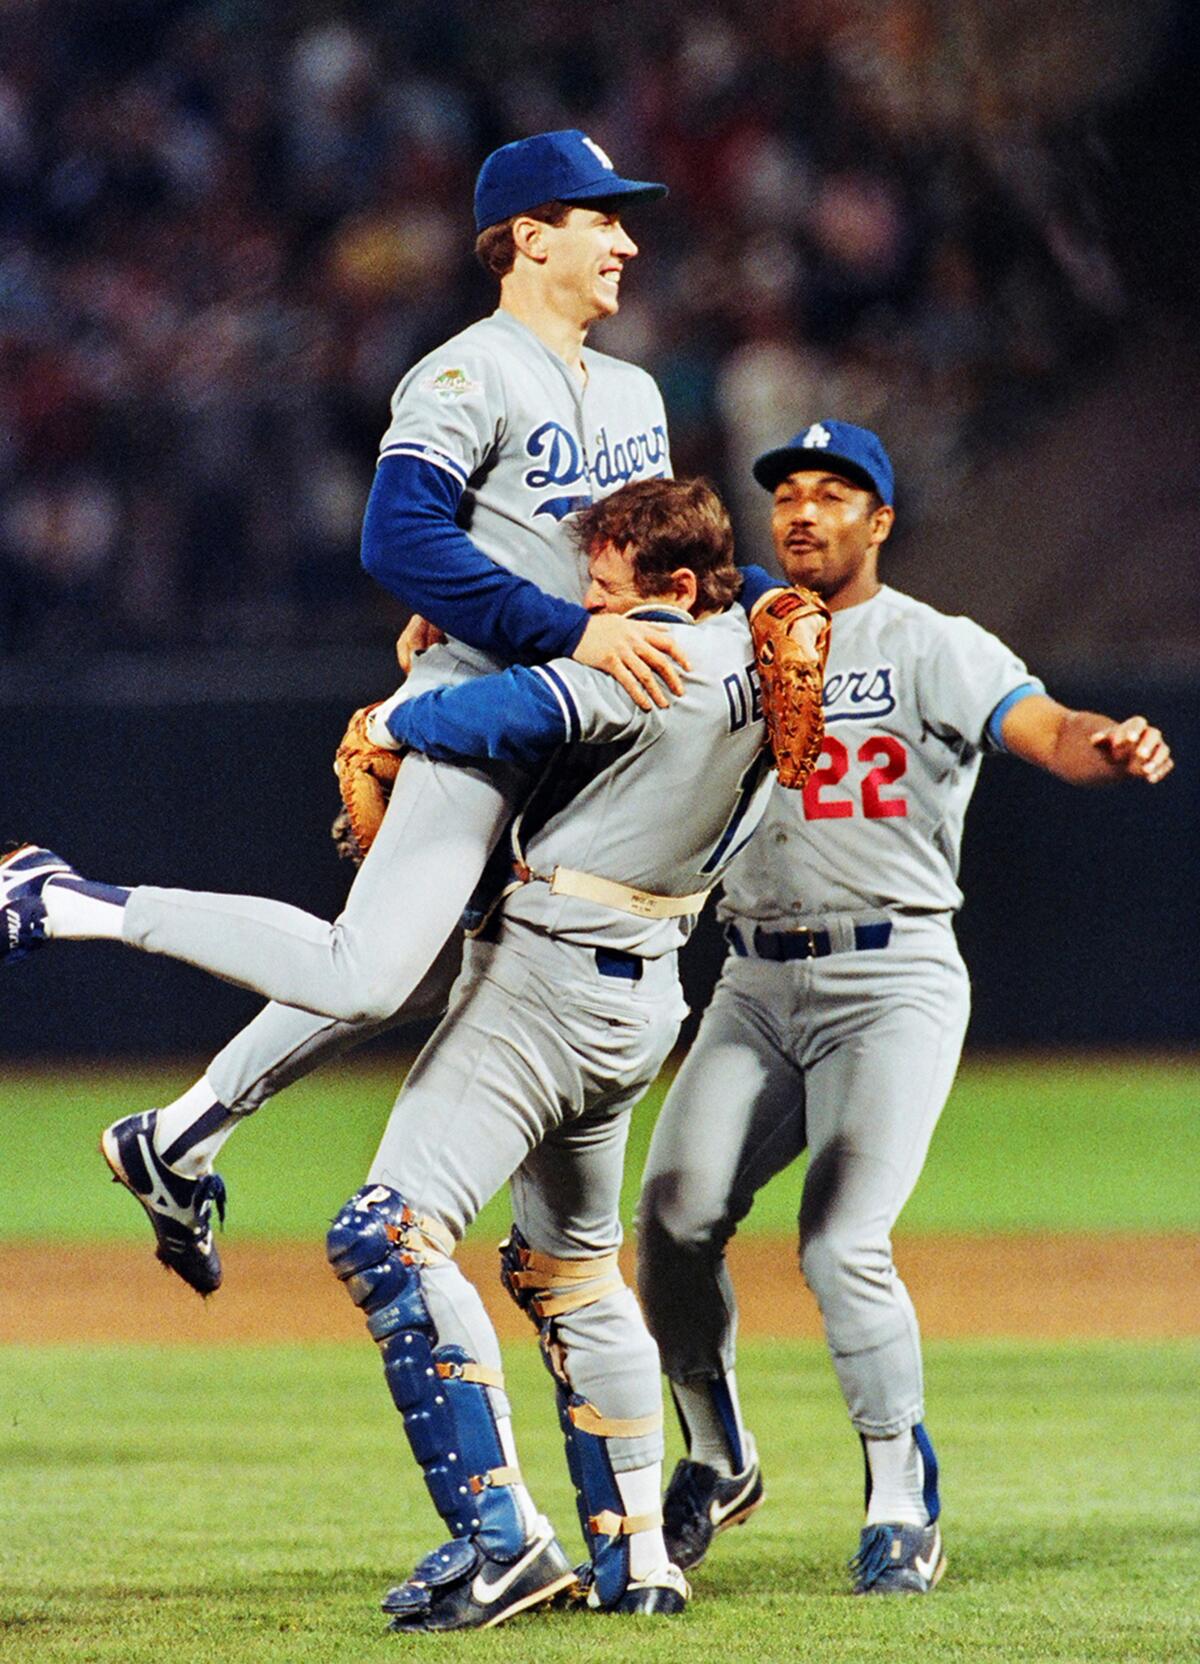 Dodgers starting pitcher Orel Hershiser leaps into the arms of catcher Rick Dempsey to celebrate title.